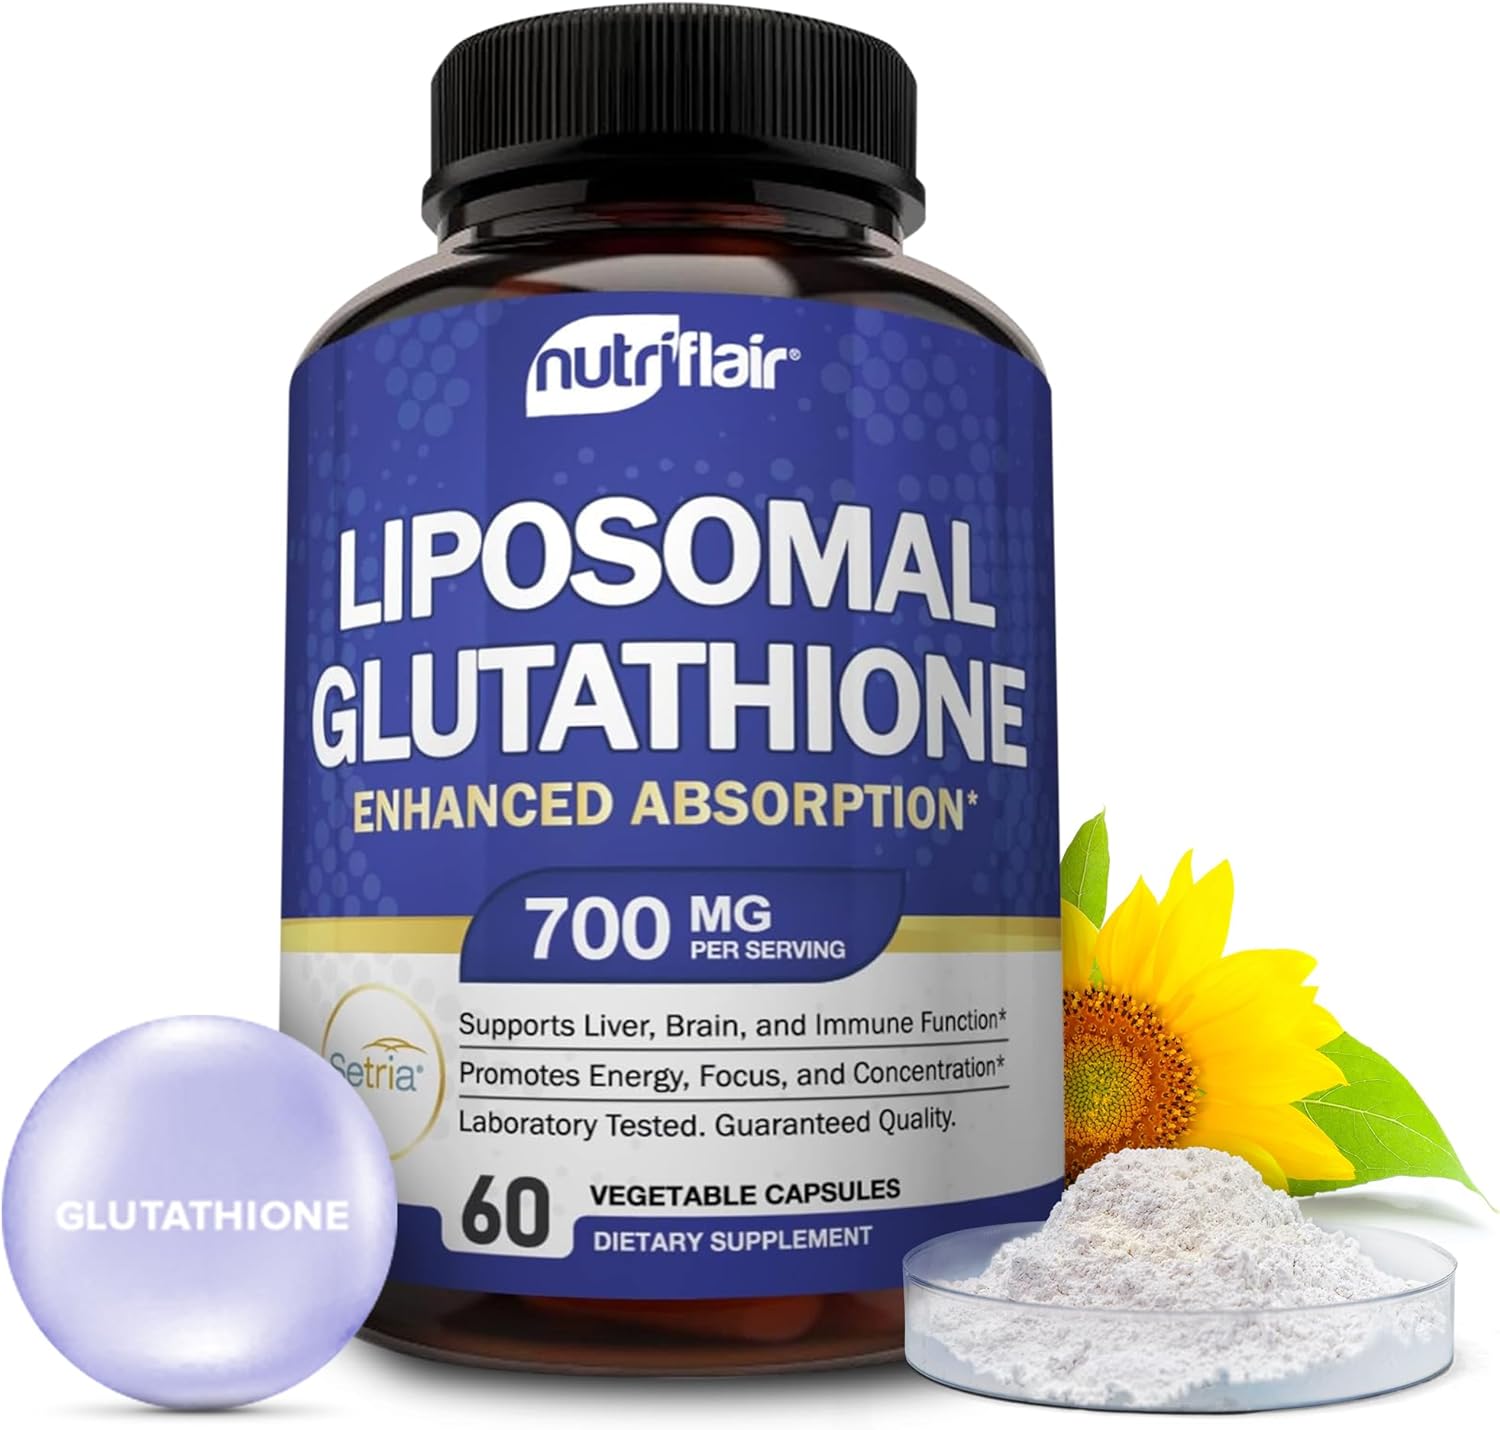 NutriFlair Liposomal Glutathione Supplement Setria® 700mg Support Liver, Brain, Immune, and overall